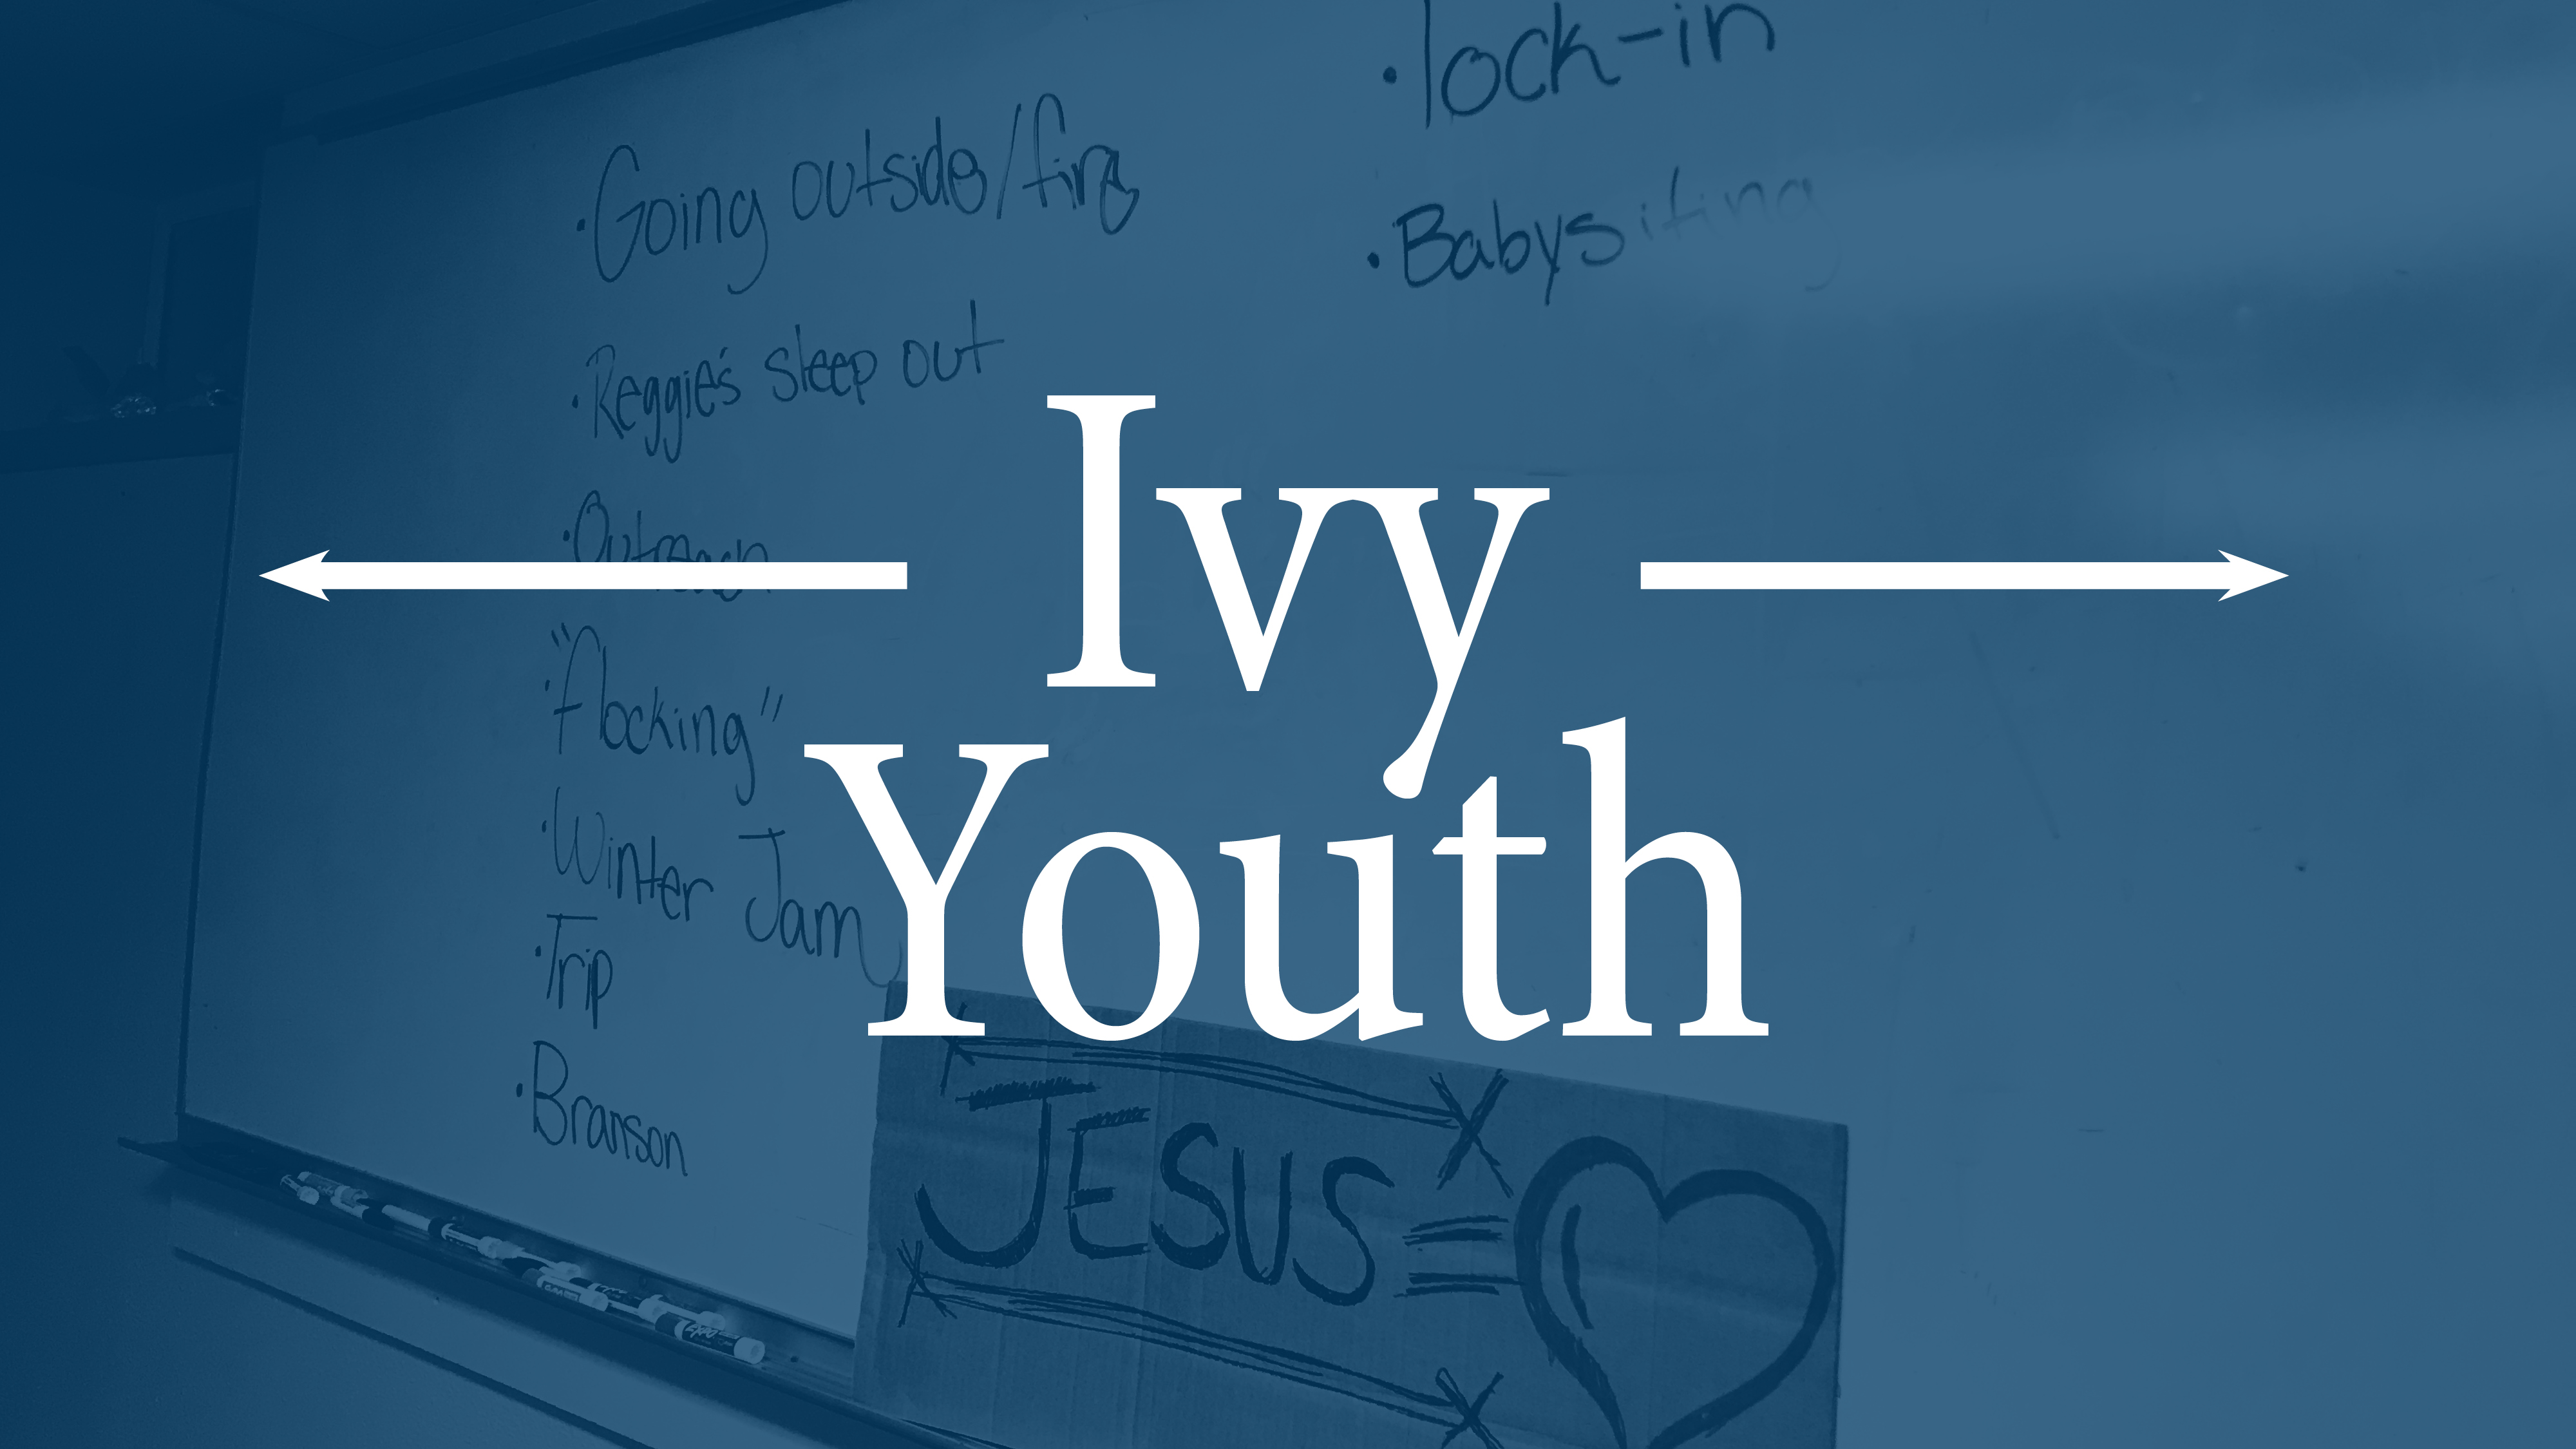 Ivy Youth